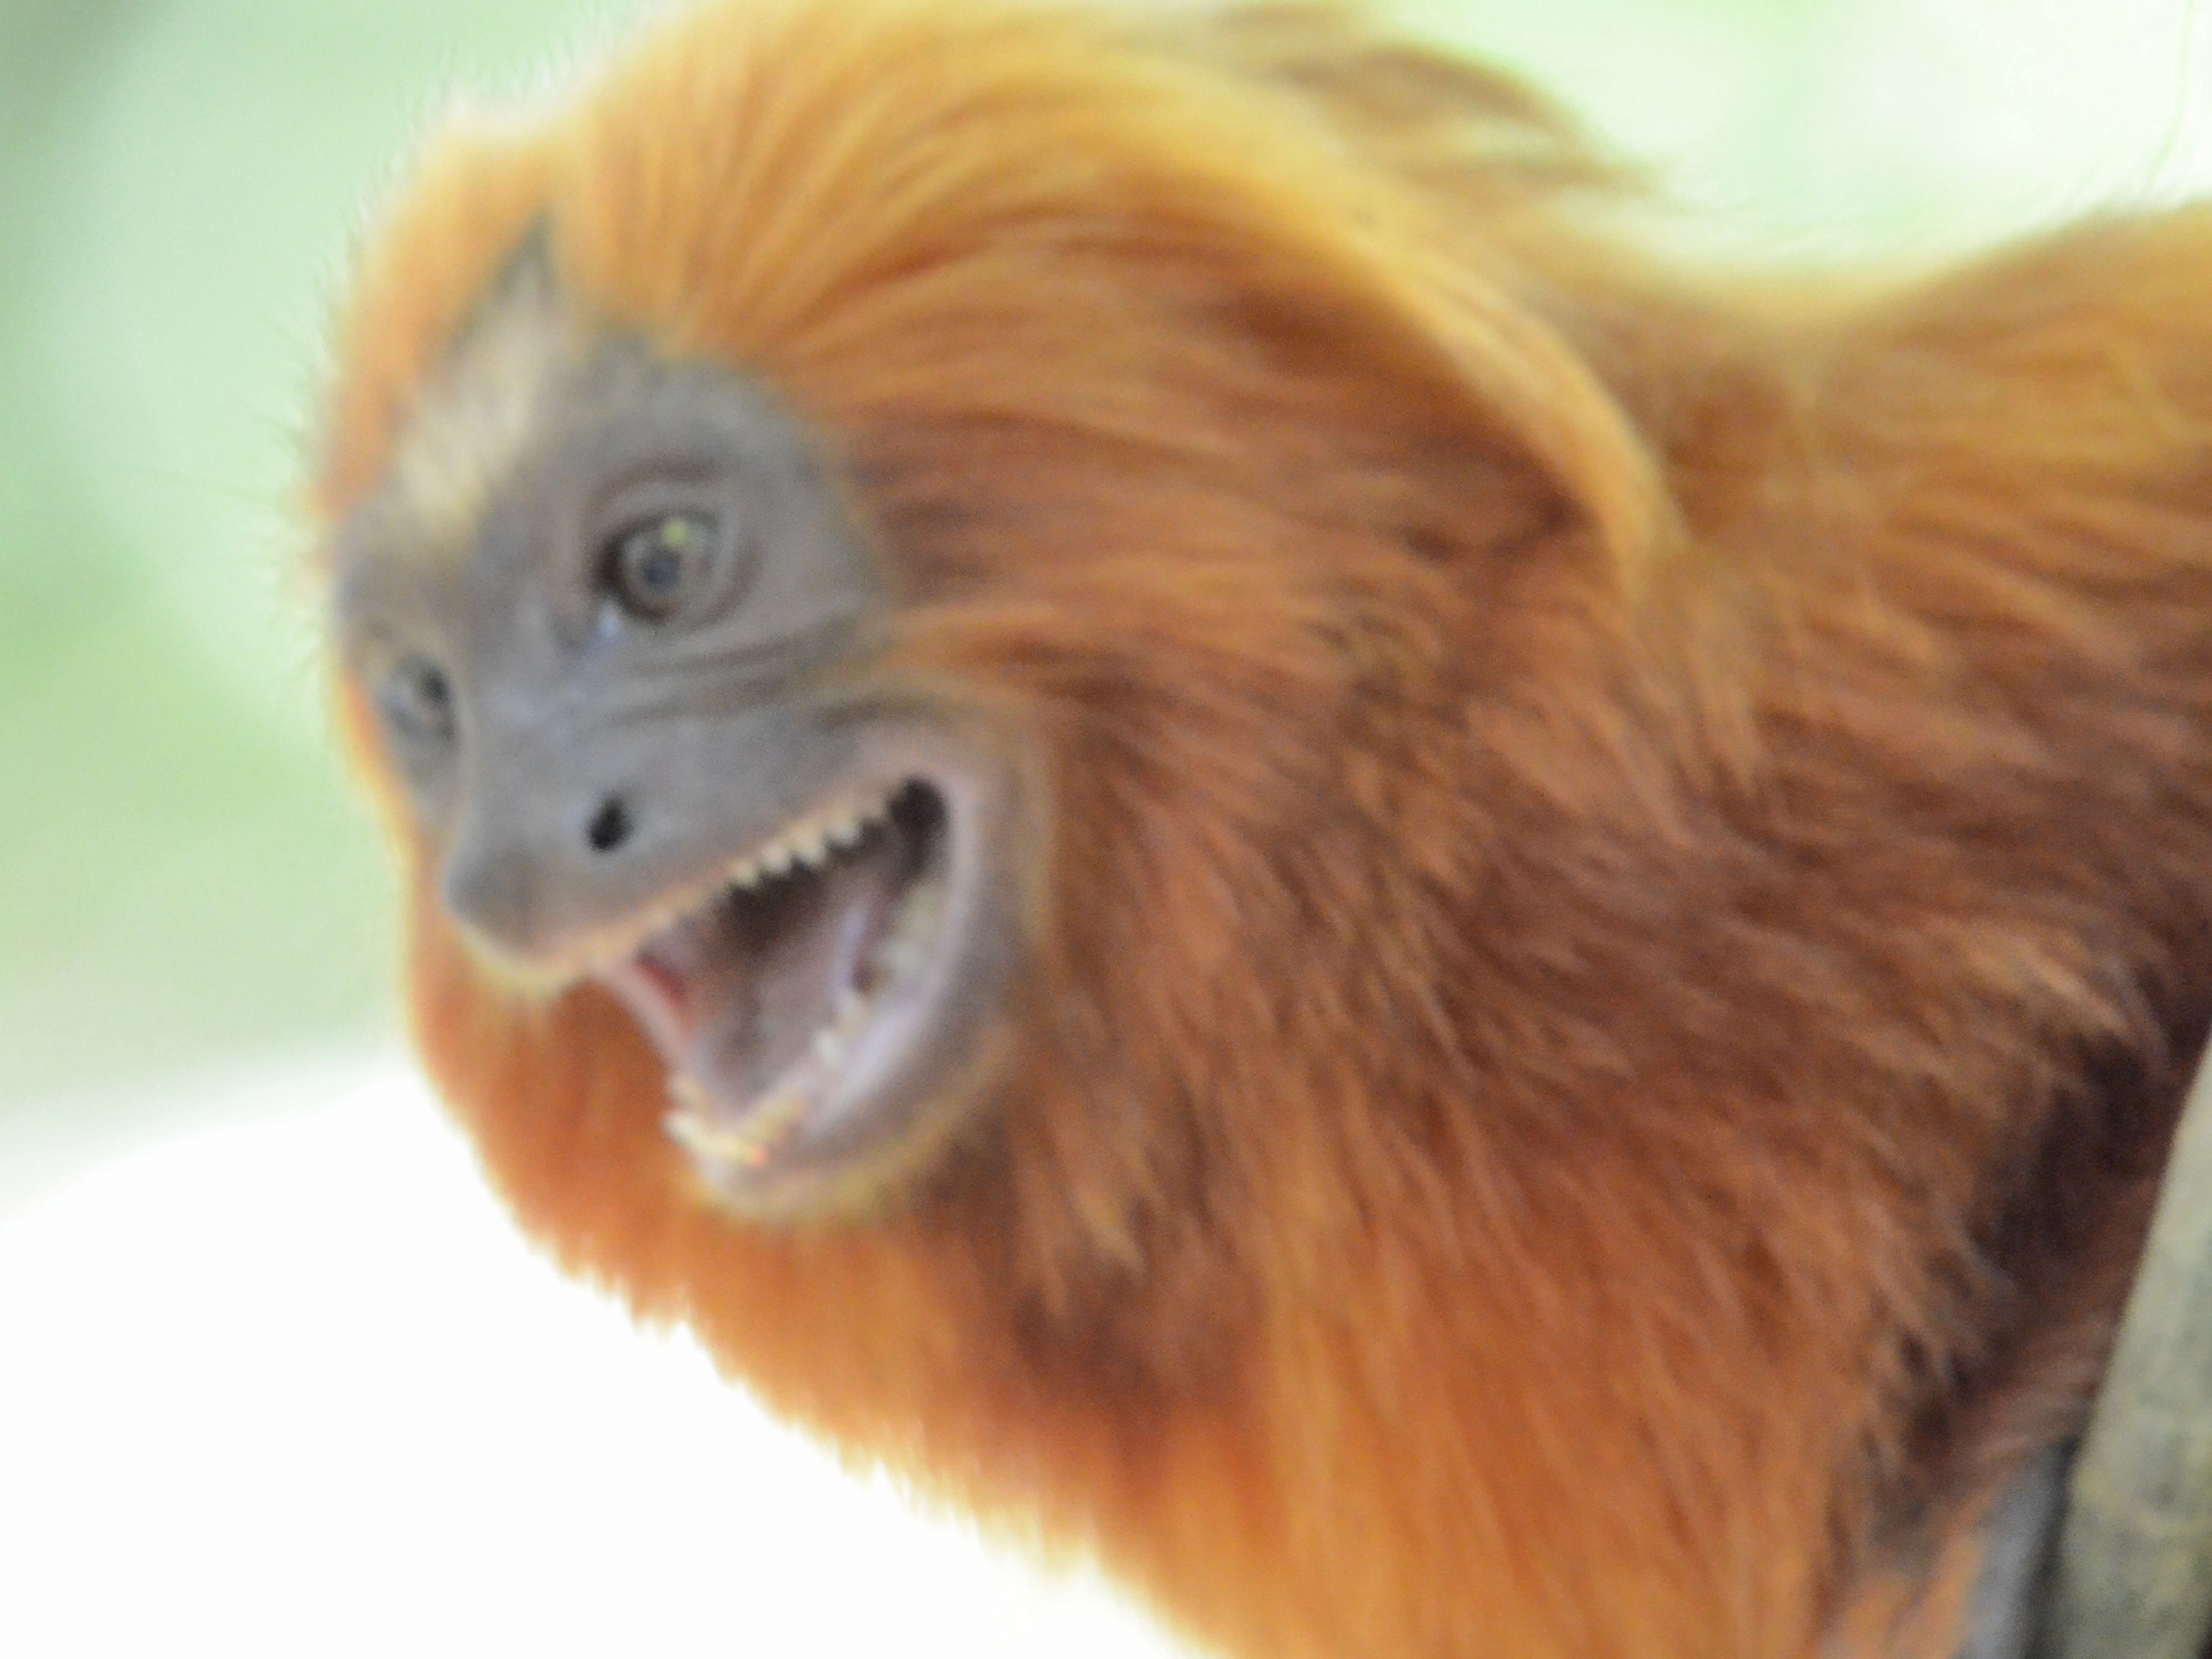 Click picture to see more Golden Lion Tamarins.